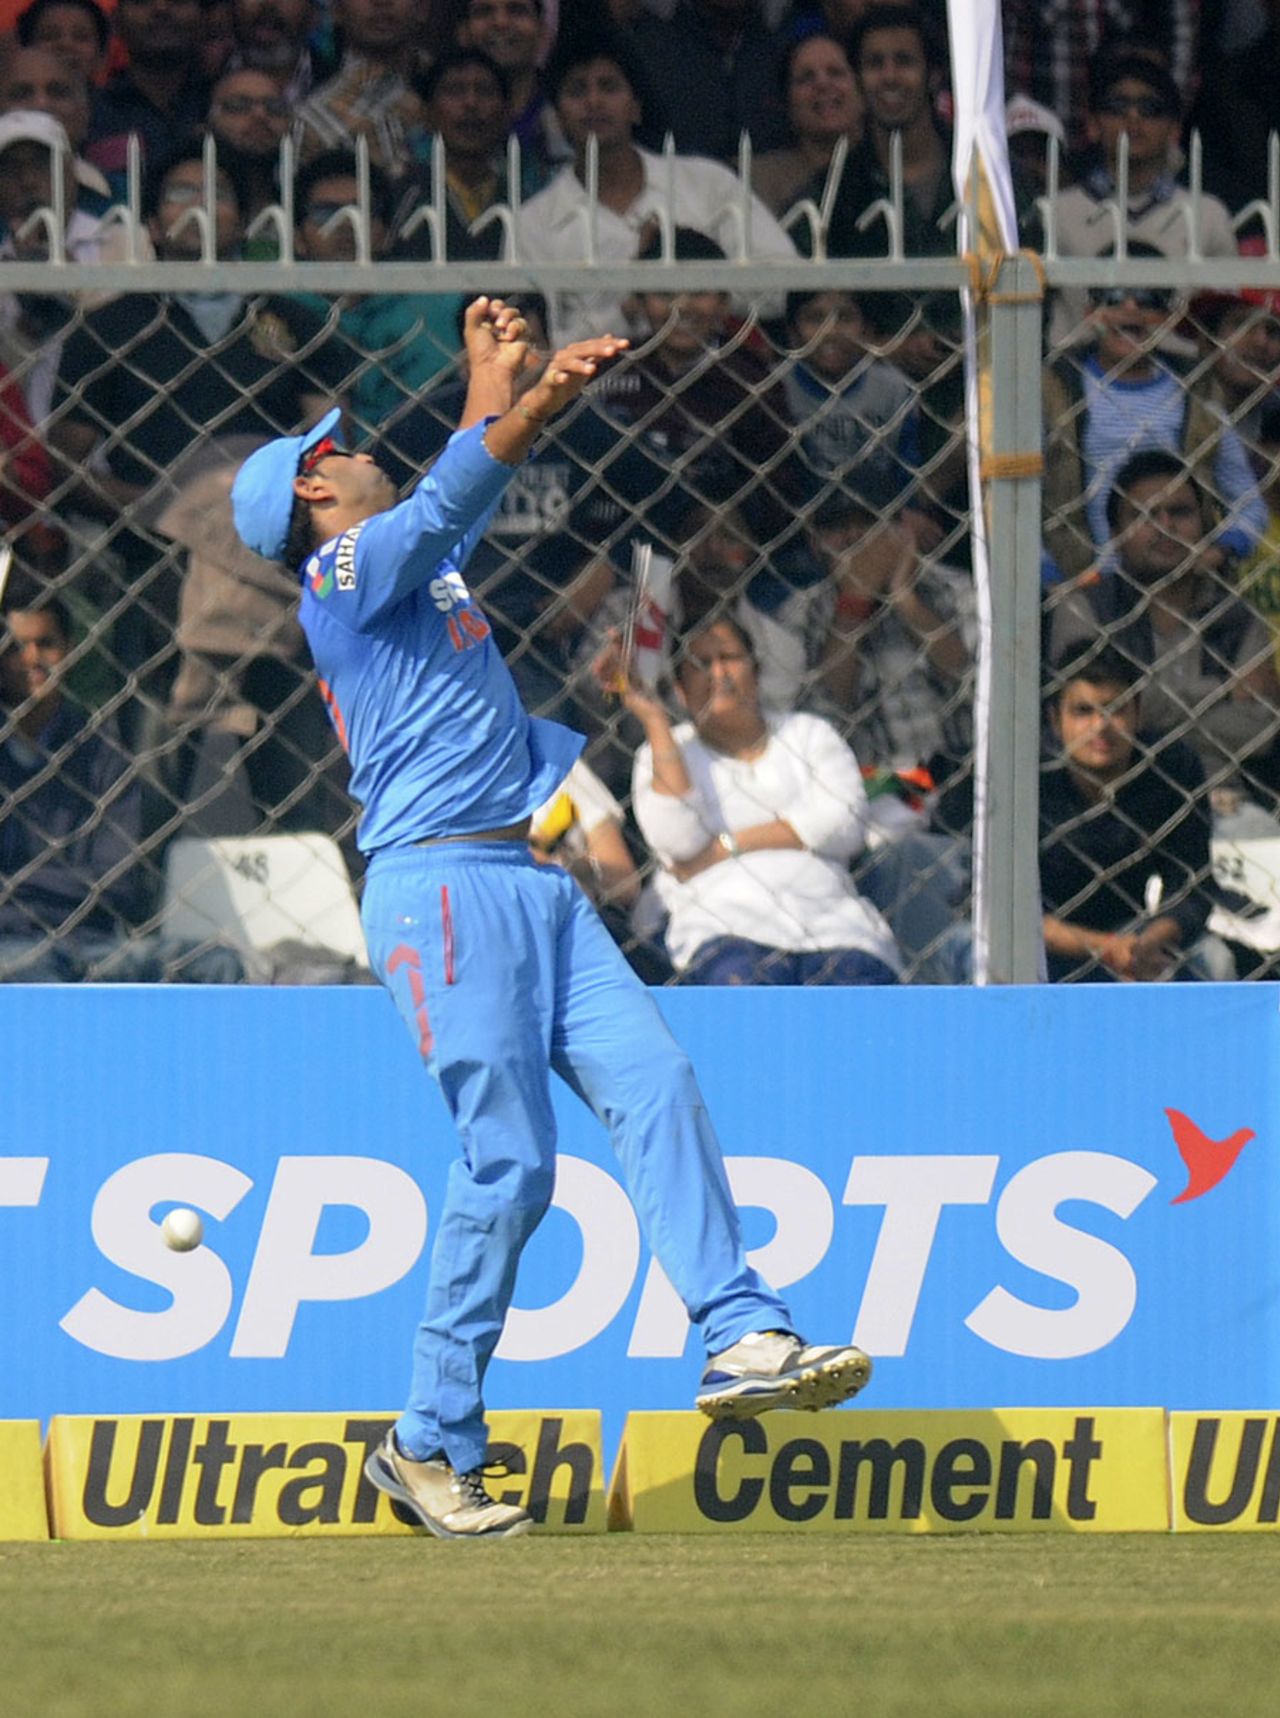 Yuvraj Singh attempts a catch at the boundary, India v West Indies, 3rd ODI, Kanpur, November 27, 2013